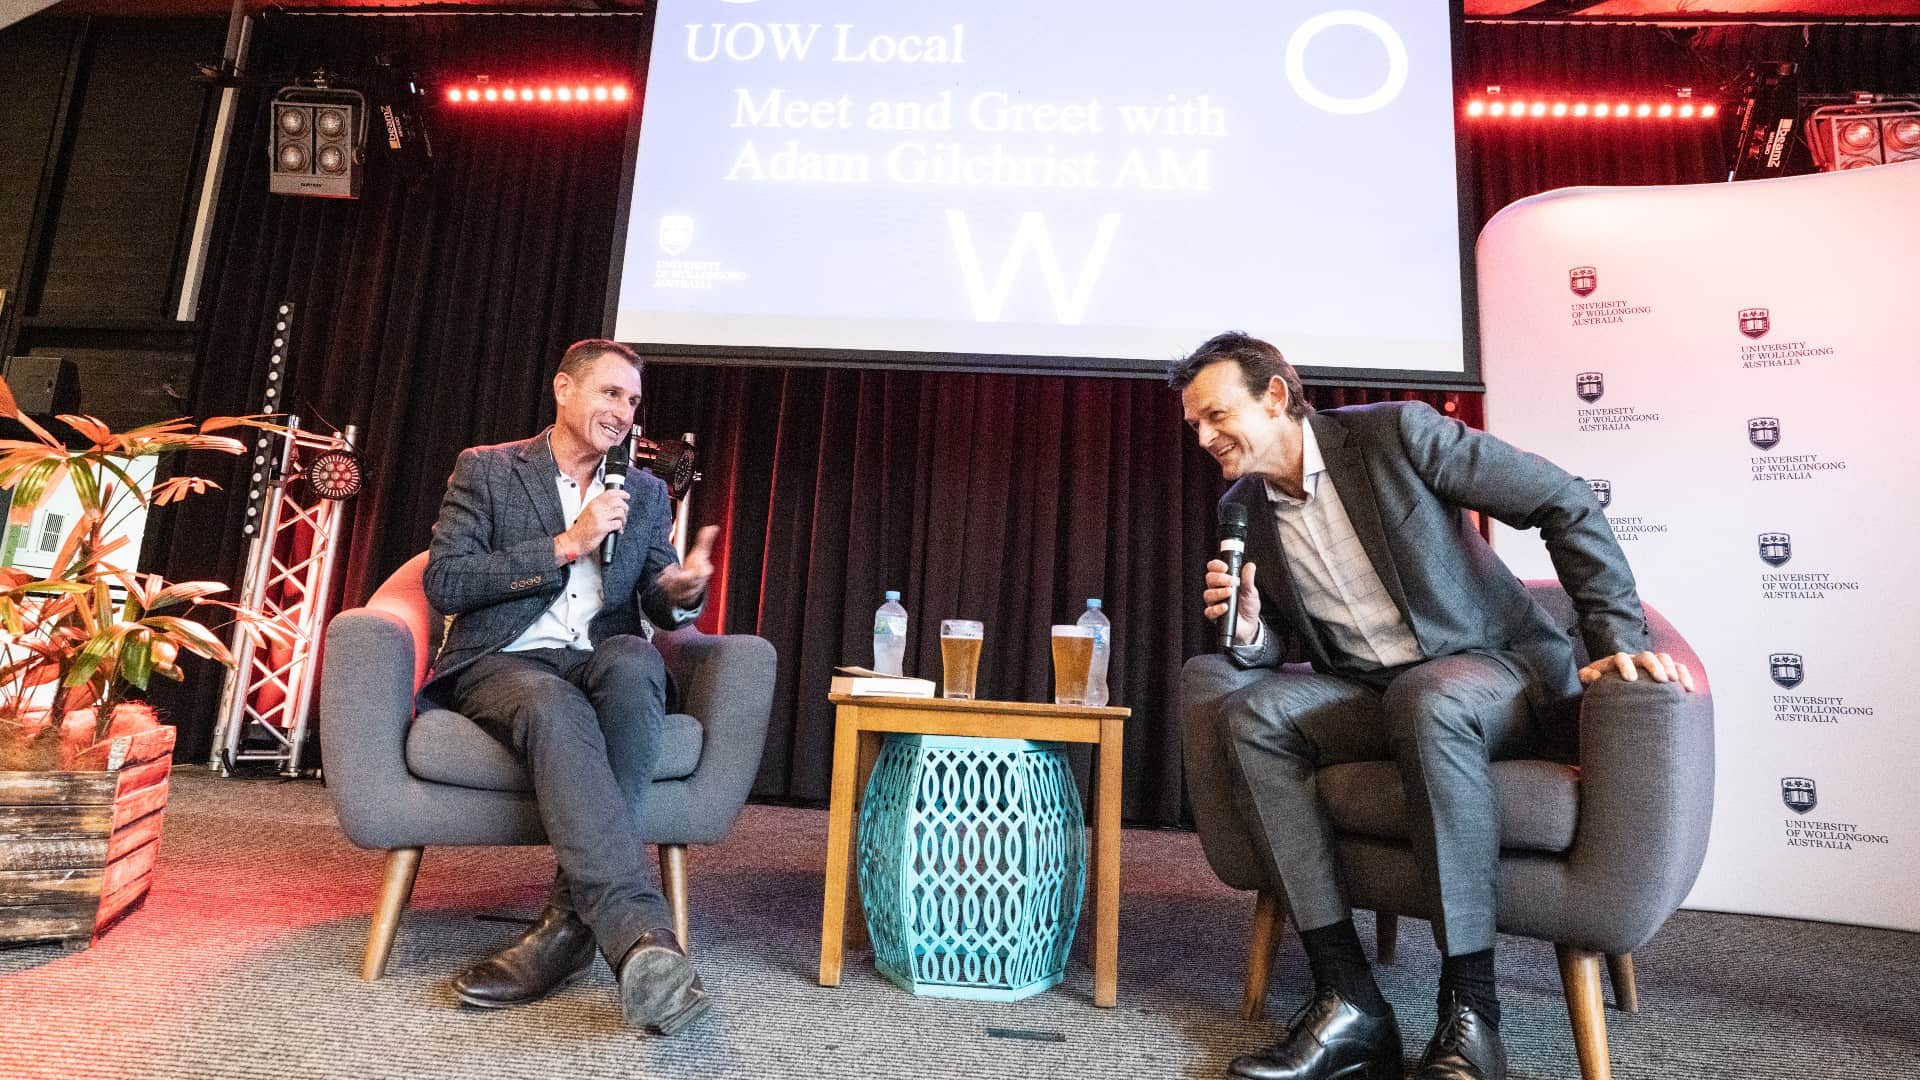 Jeremy Wilshire and Adam Gilchrist chat on stage as they sit in armchairs during the UOW Local event at UniBar. Photo: Paul Jones